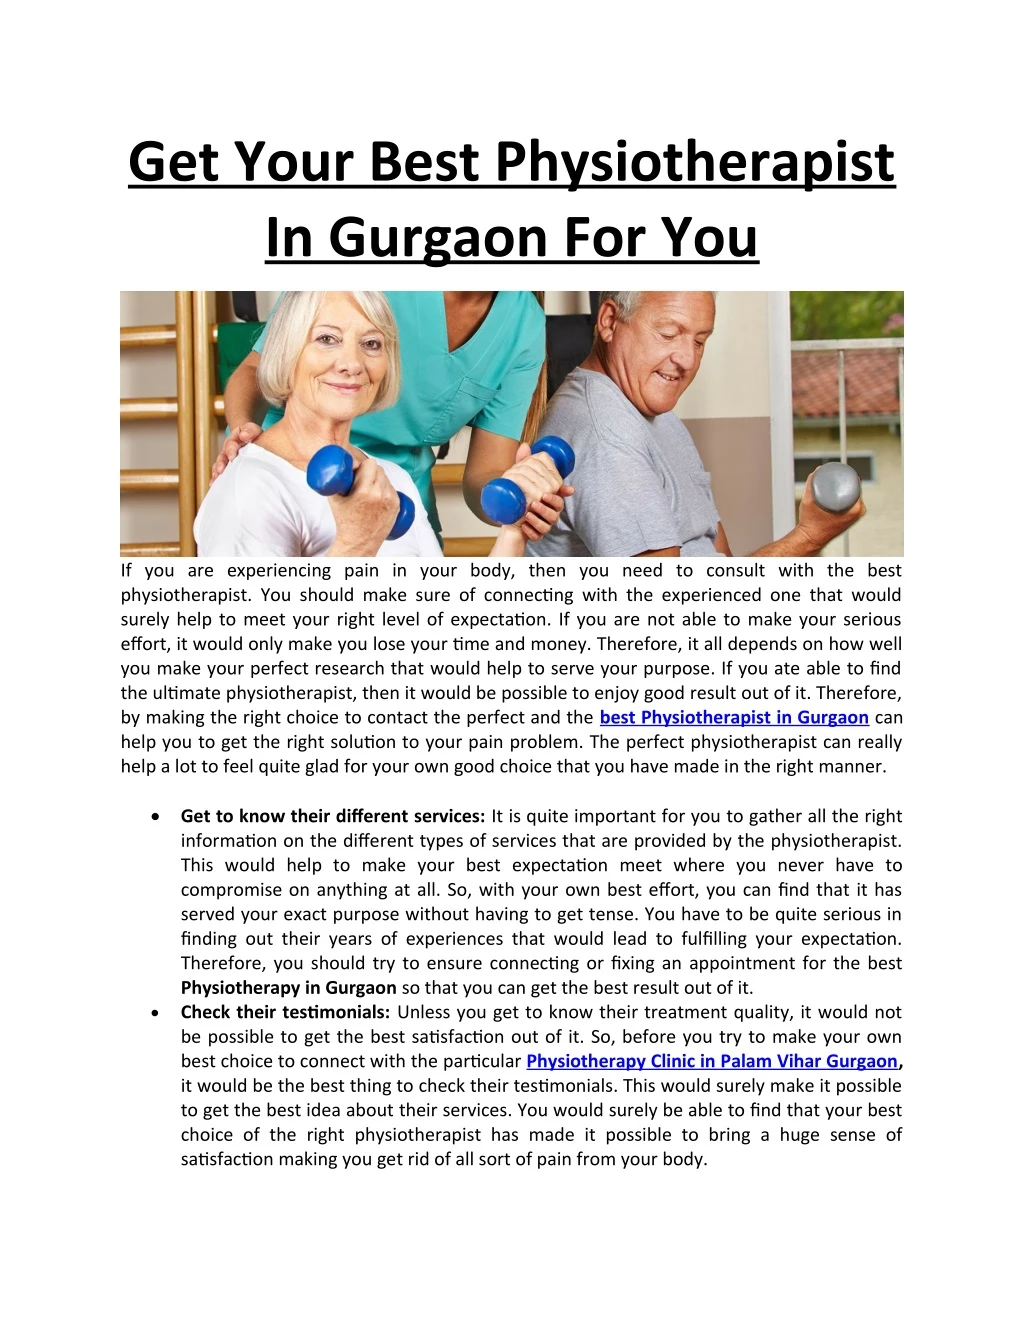 get your best physiotherapist in gurgaon for you